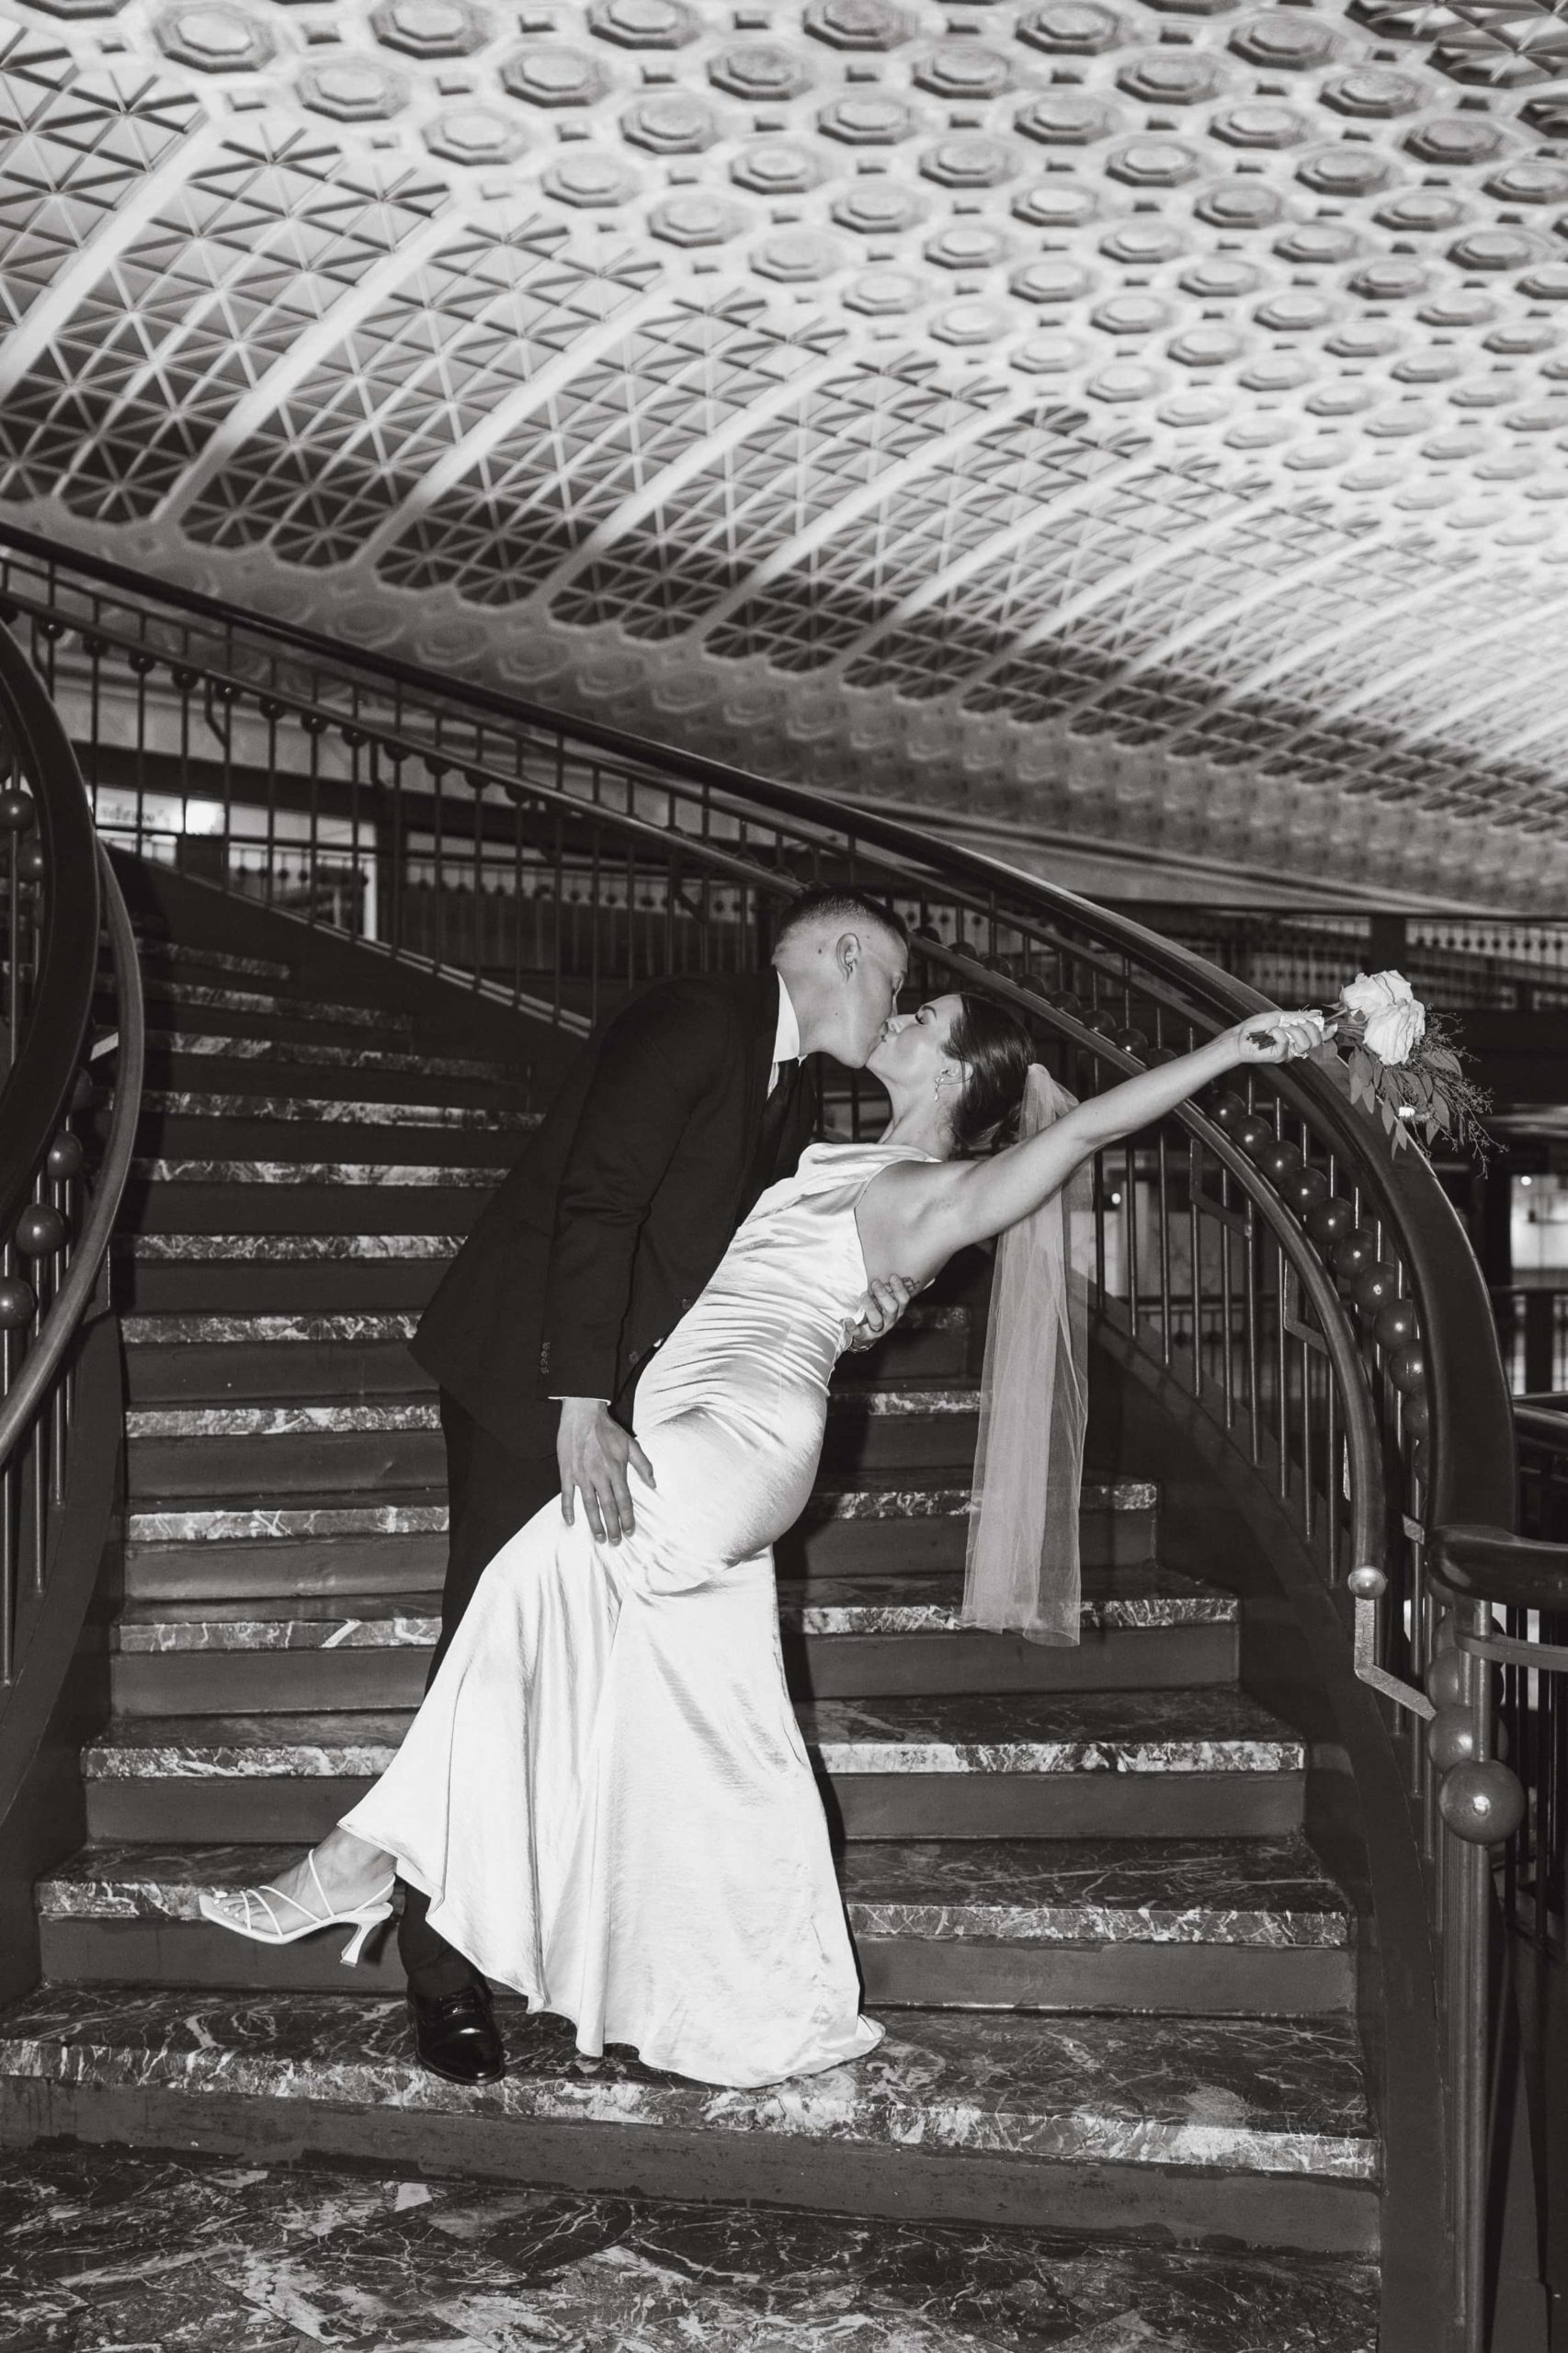 Bride and groom kiss on a staircase in Union Station, DC with bride's arm raised holding a bouquet.